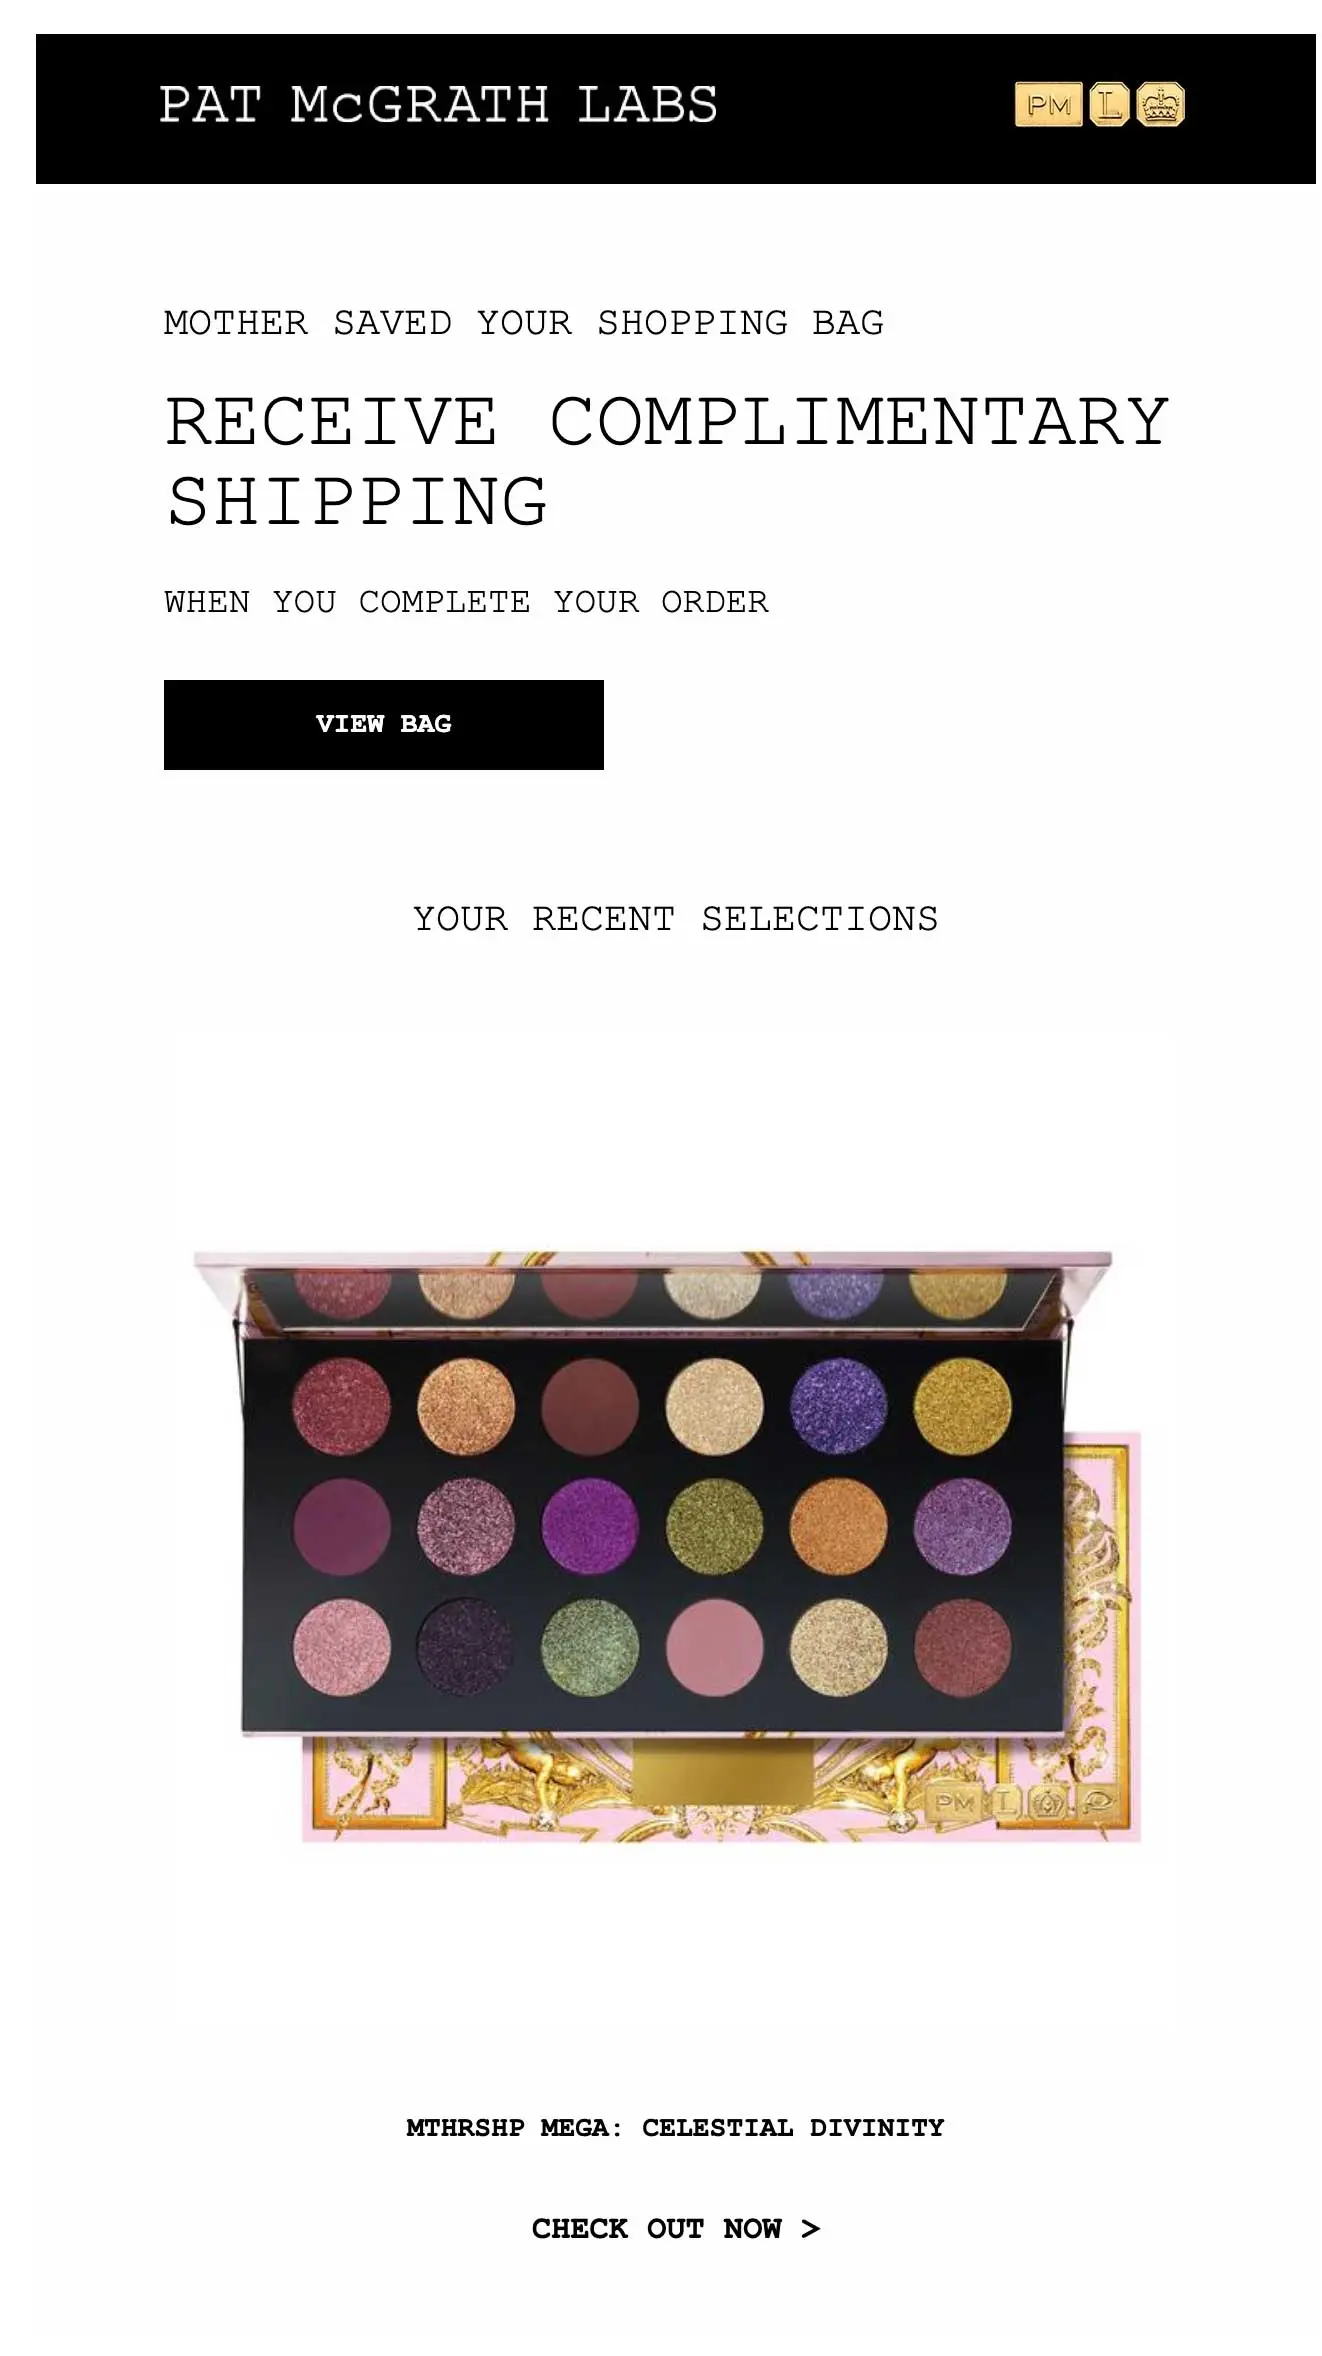 woocommerce abandoned cart pat mcgrath email for complimentary shipping